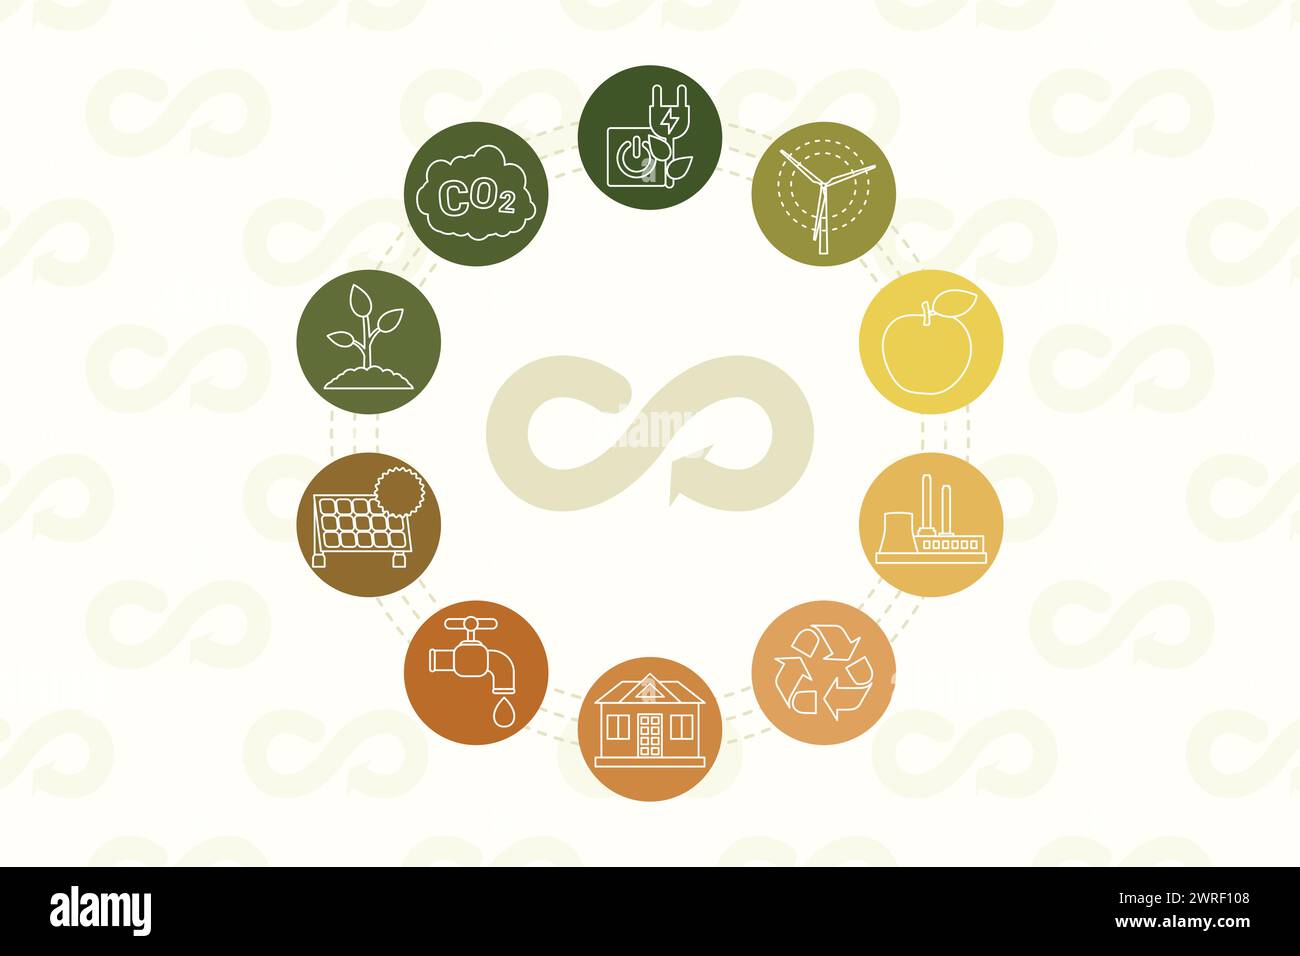 Circular economy concept. Scheme of icons representing ecofriendly practices like carbon neutral, zero waste, green energy and recycling. Ecological i Stock Vector